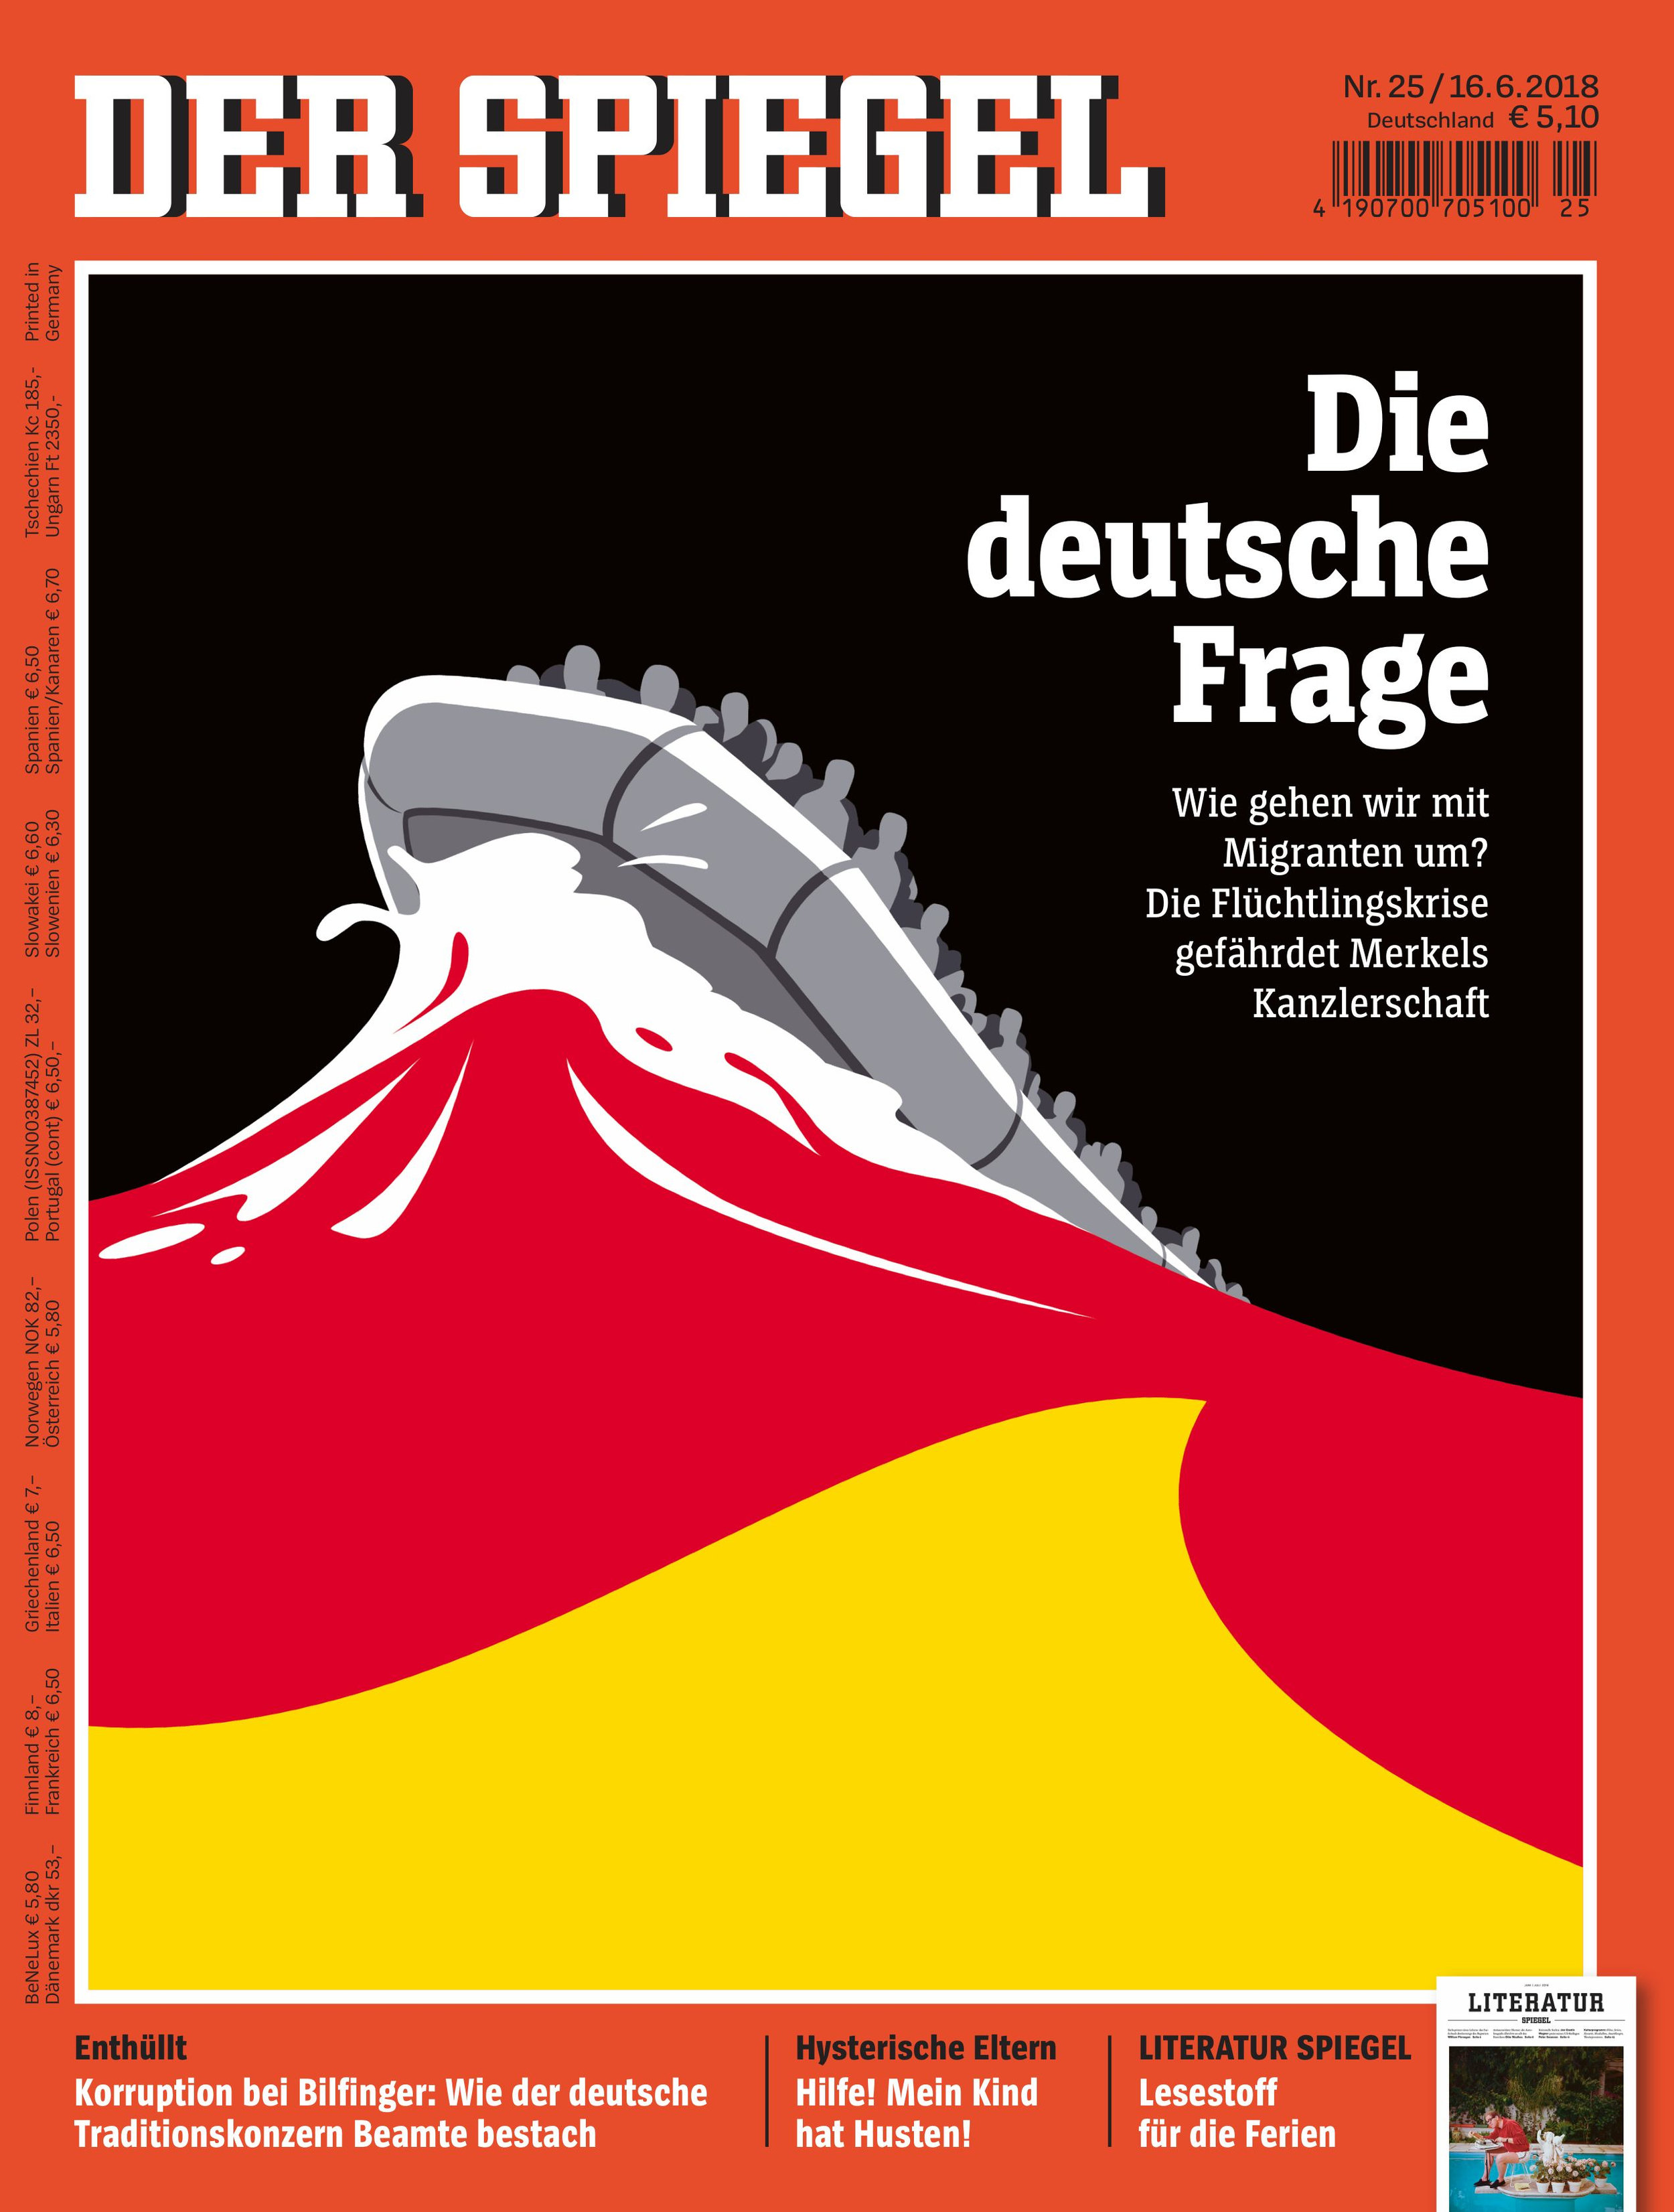 The cover of this week's Der Spiegel. : r/neoliberal